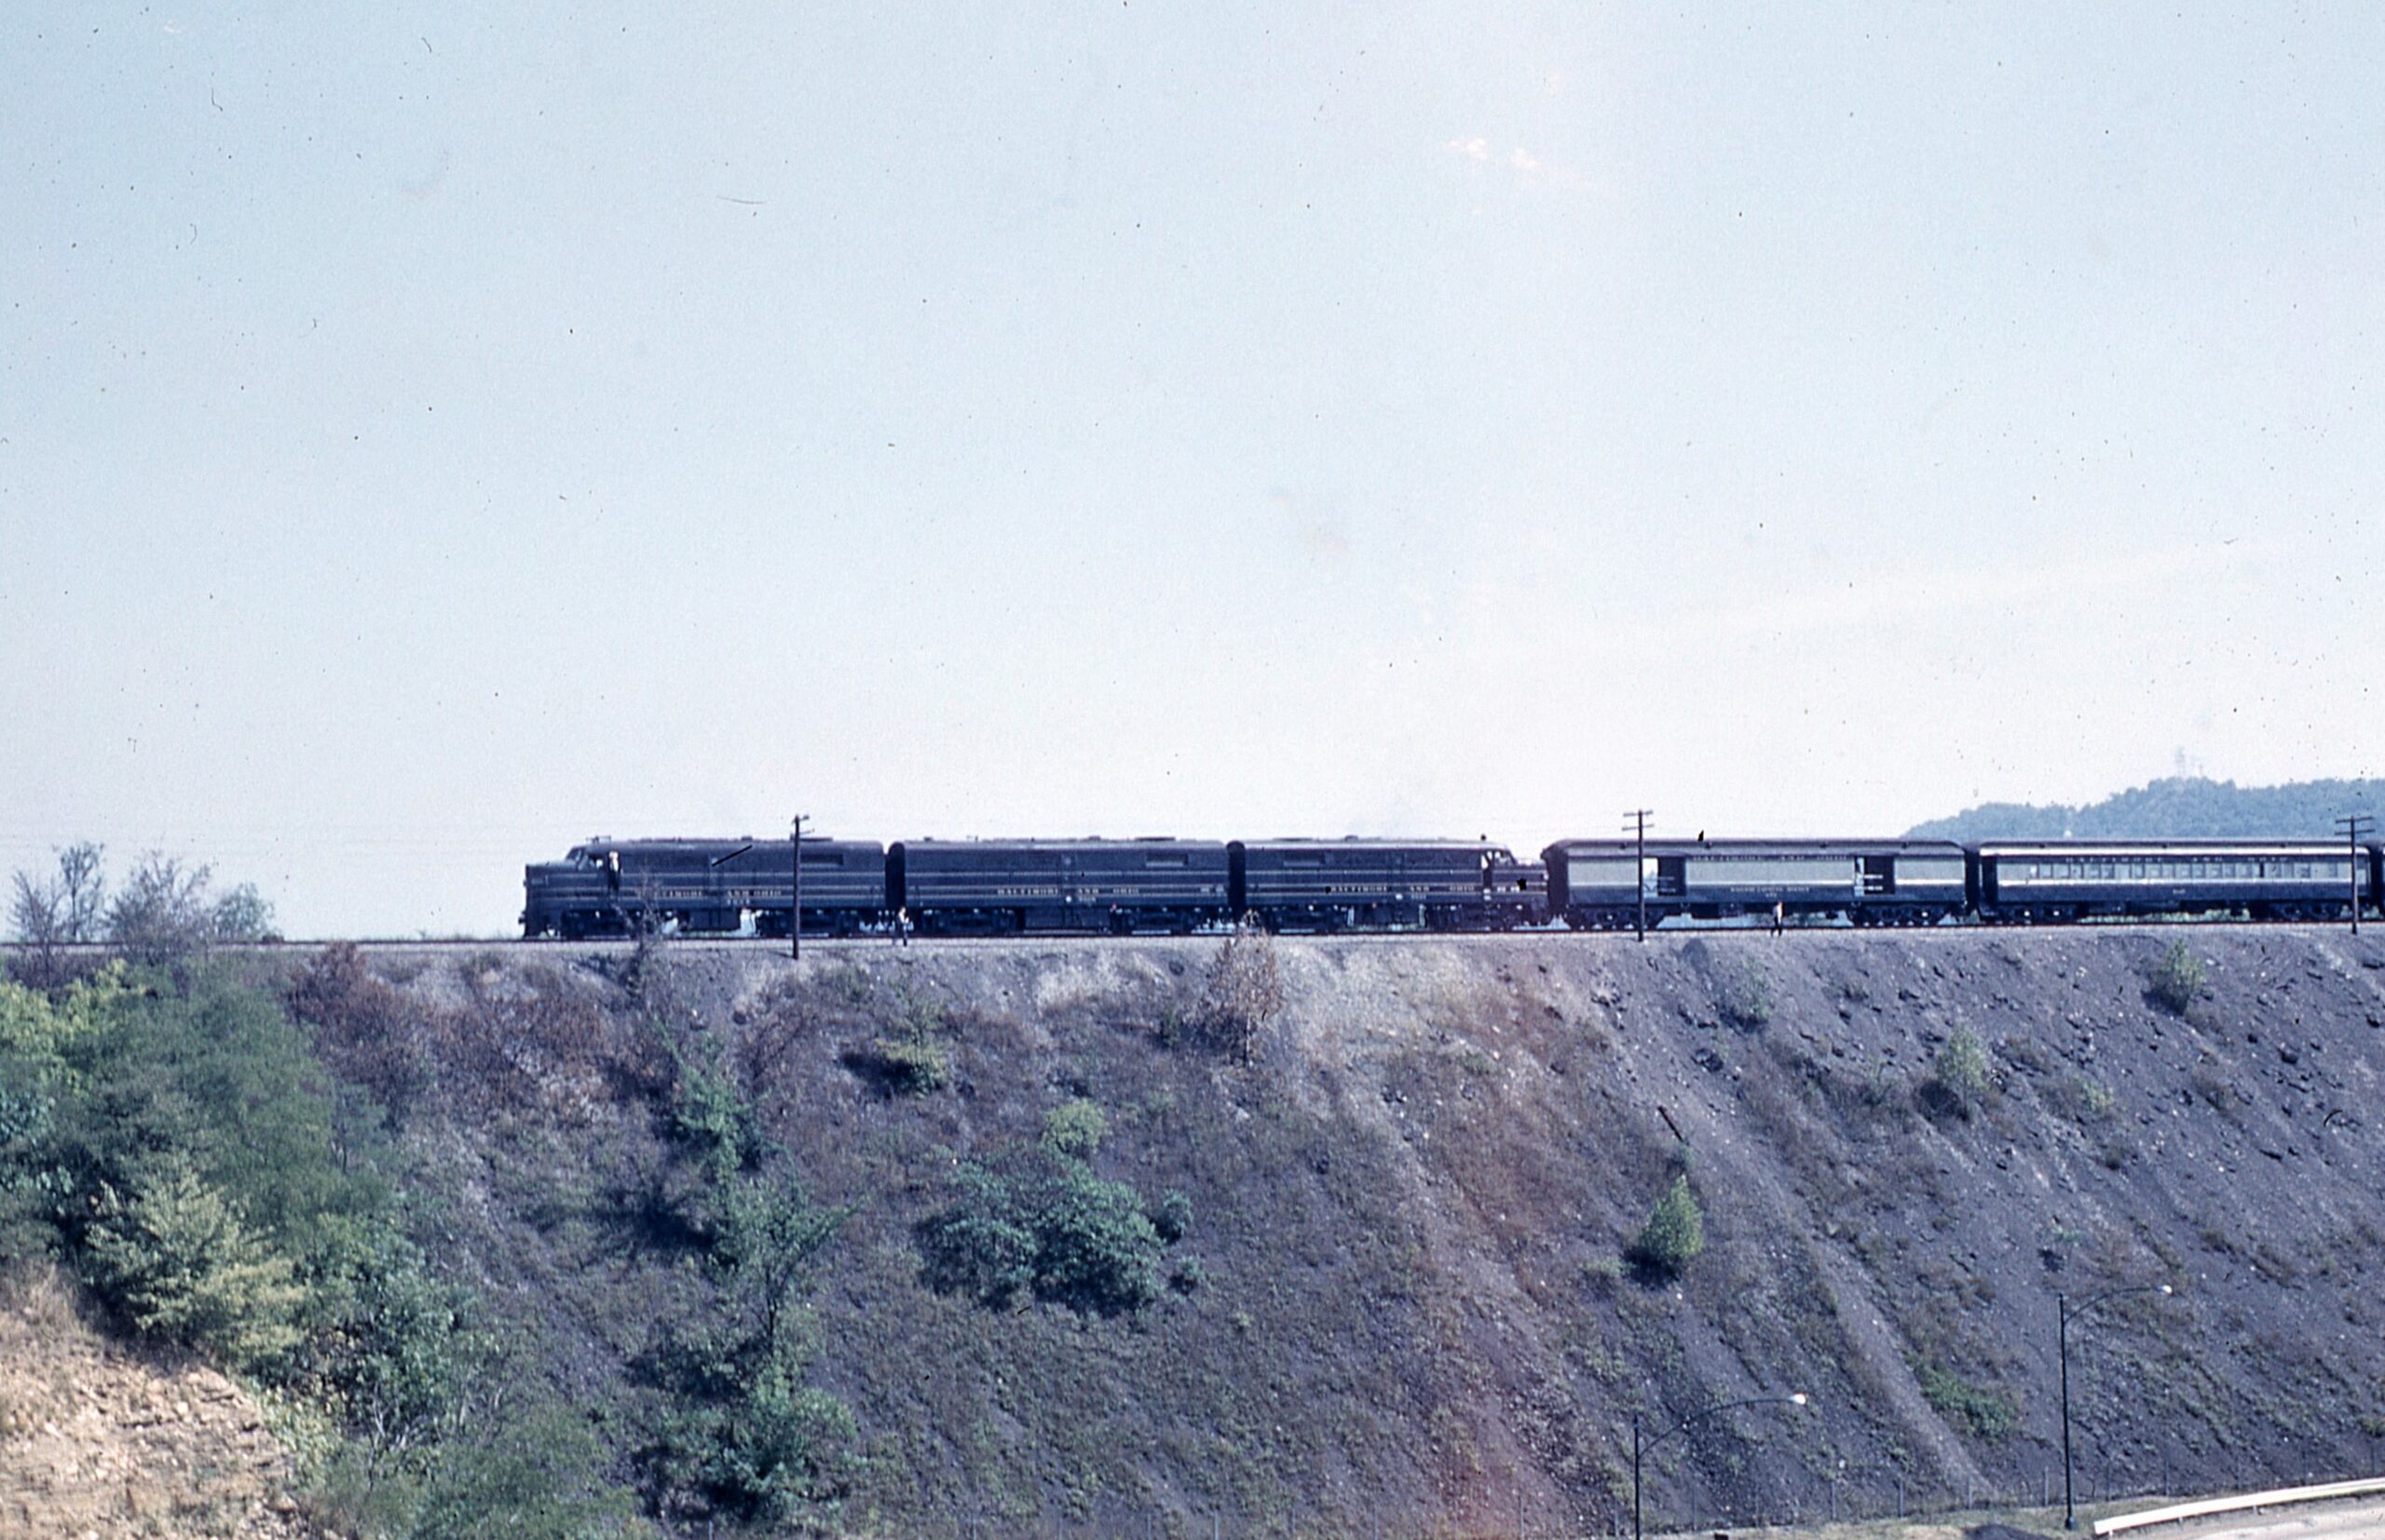 Baltimore and Ohio | Harmor Township, Pennsylvania | Alco FABA #4021 diesel-electric locomotives | 1959 NRHS Convention Excursion on B&LE | September 5, 1959 | NRHS Collection